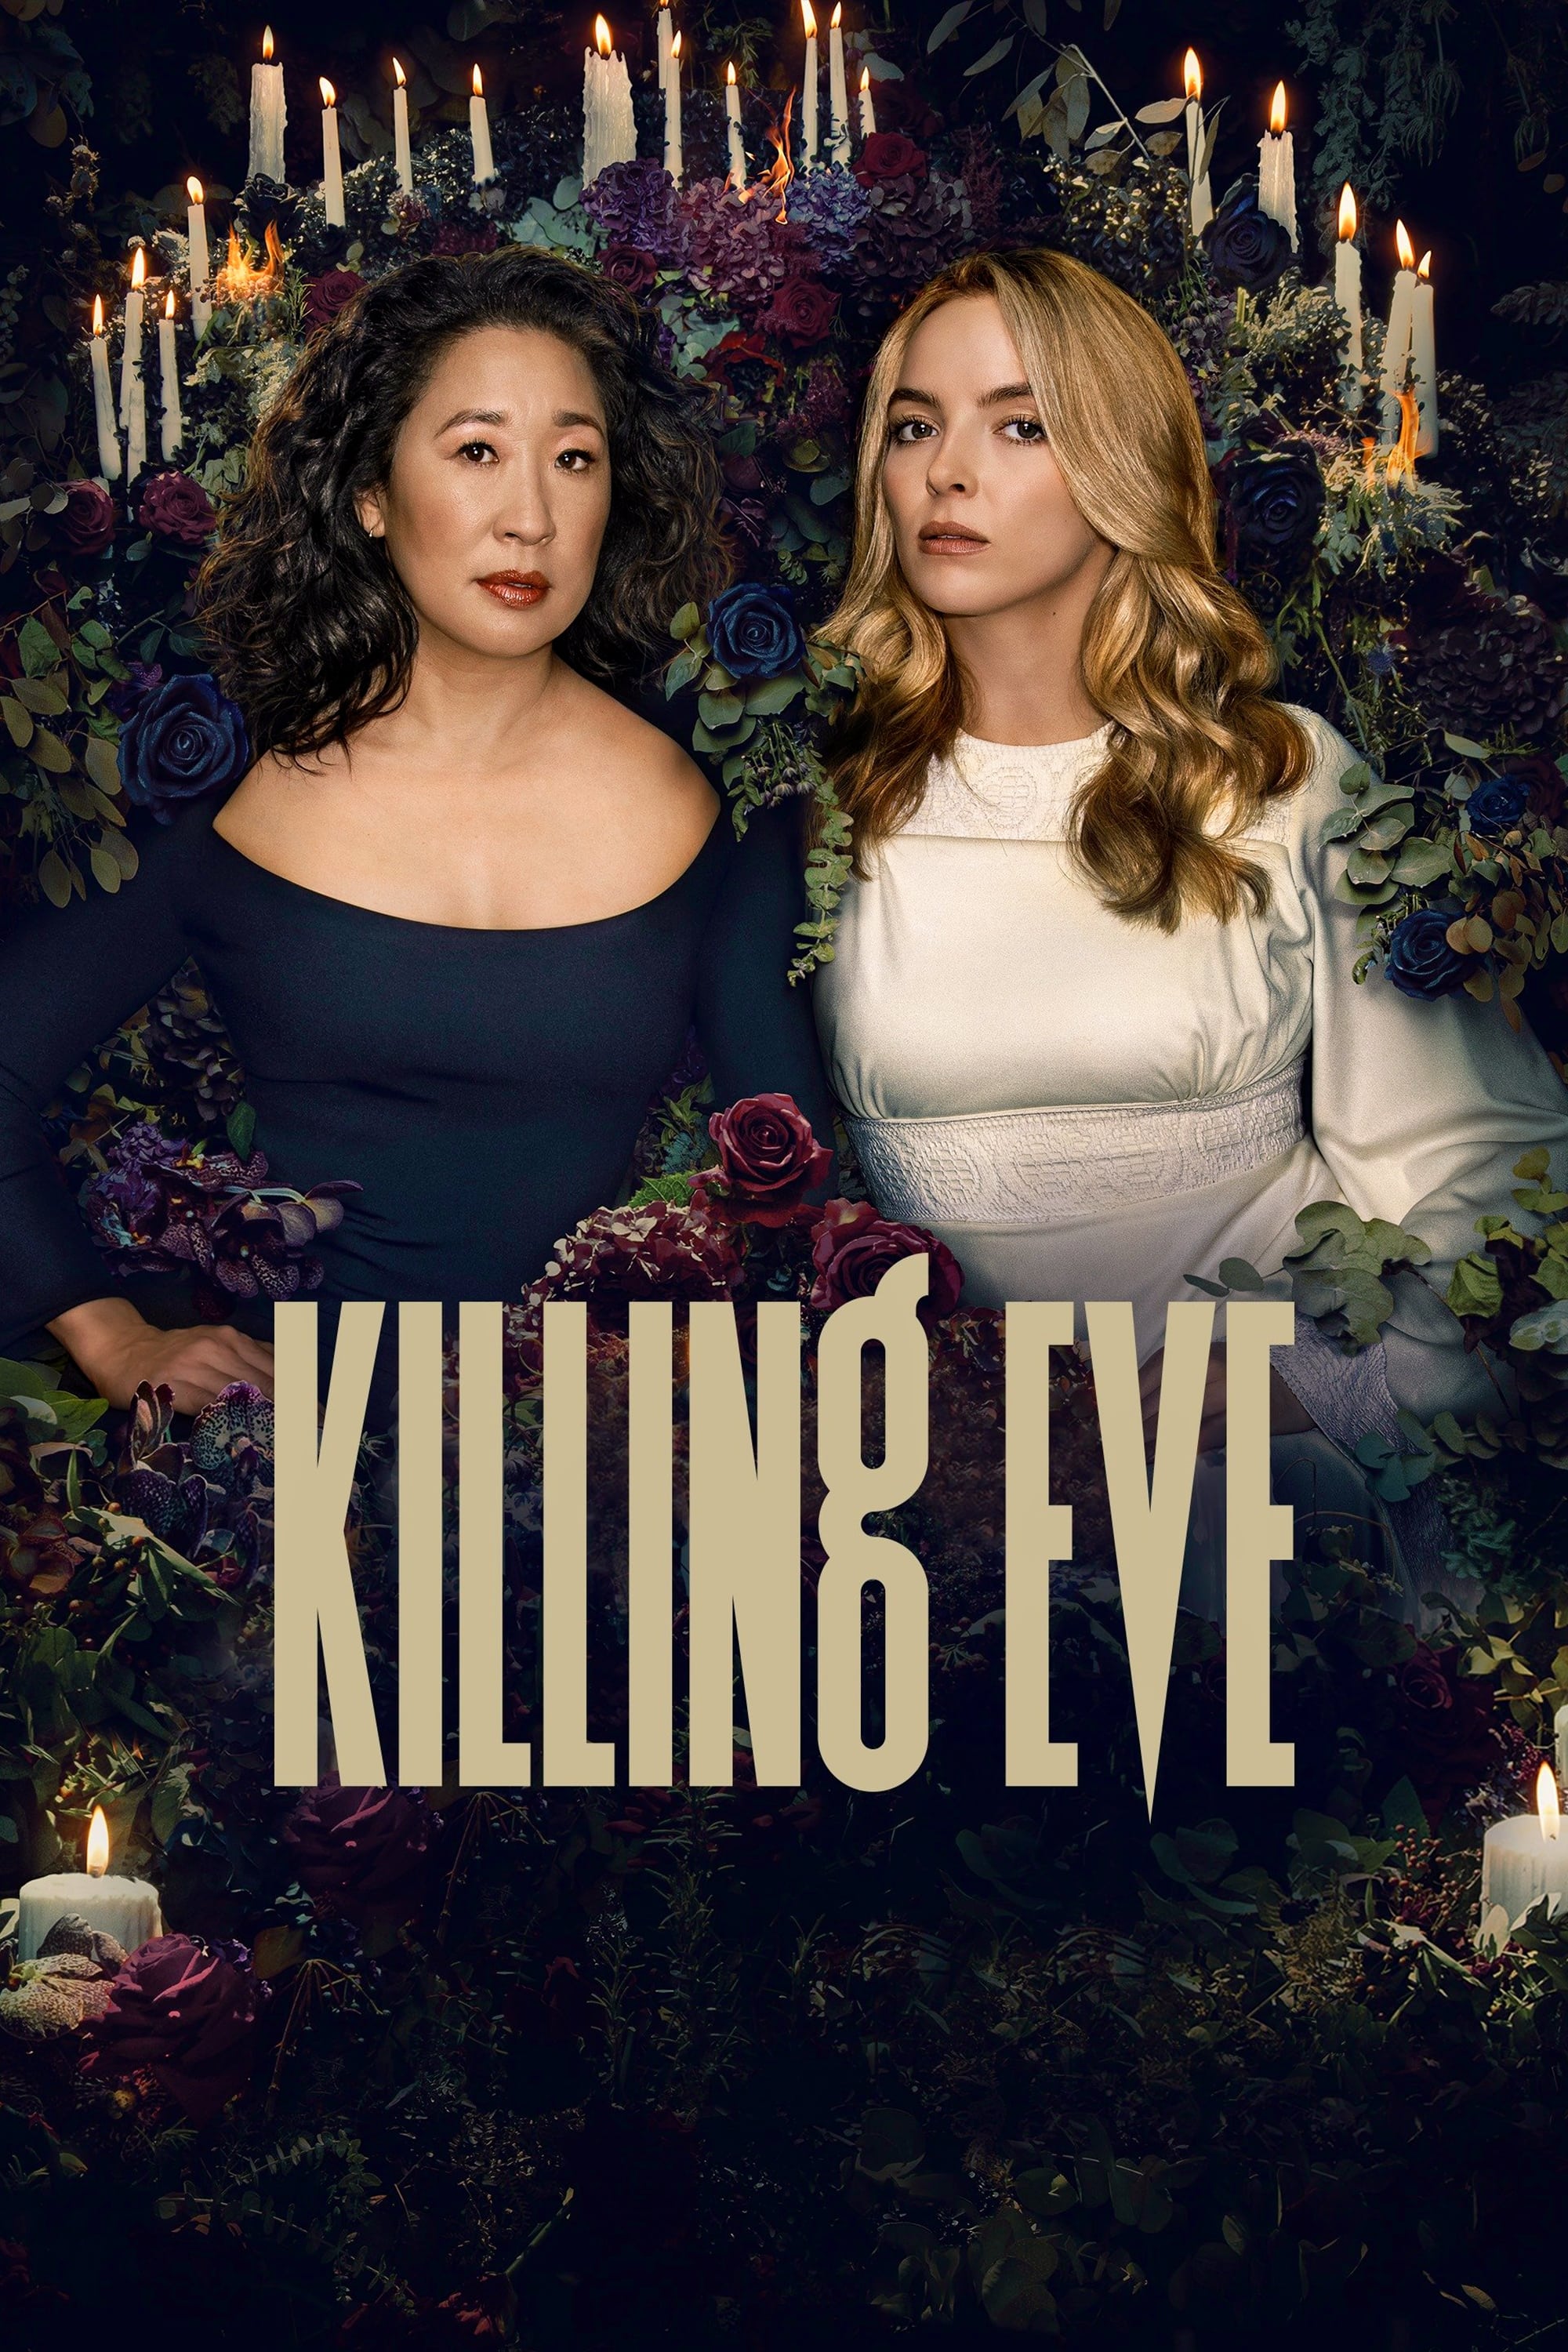 Killing Eve TV Shows About Torture